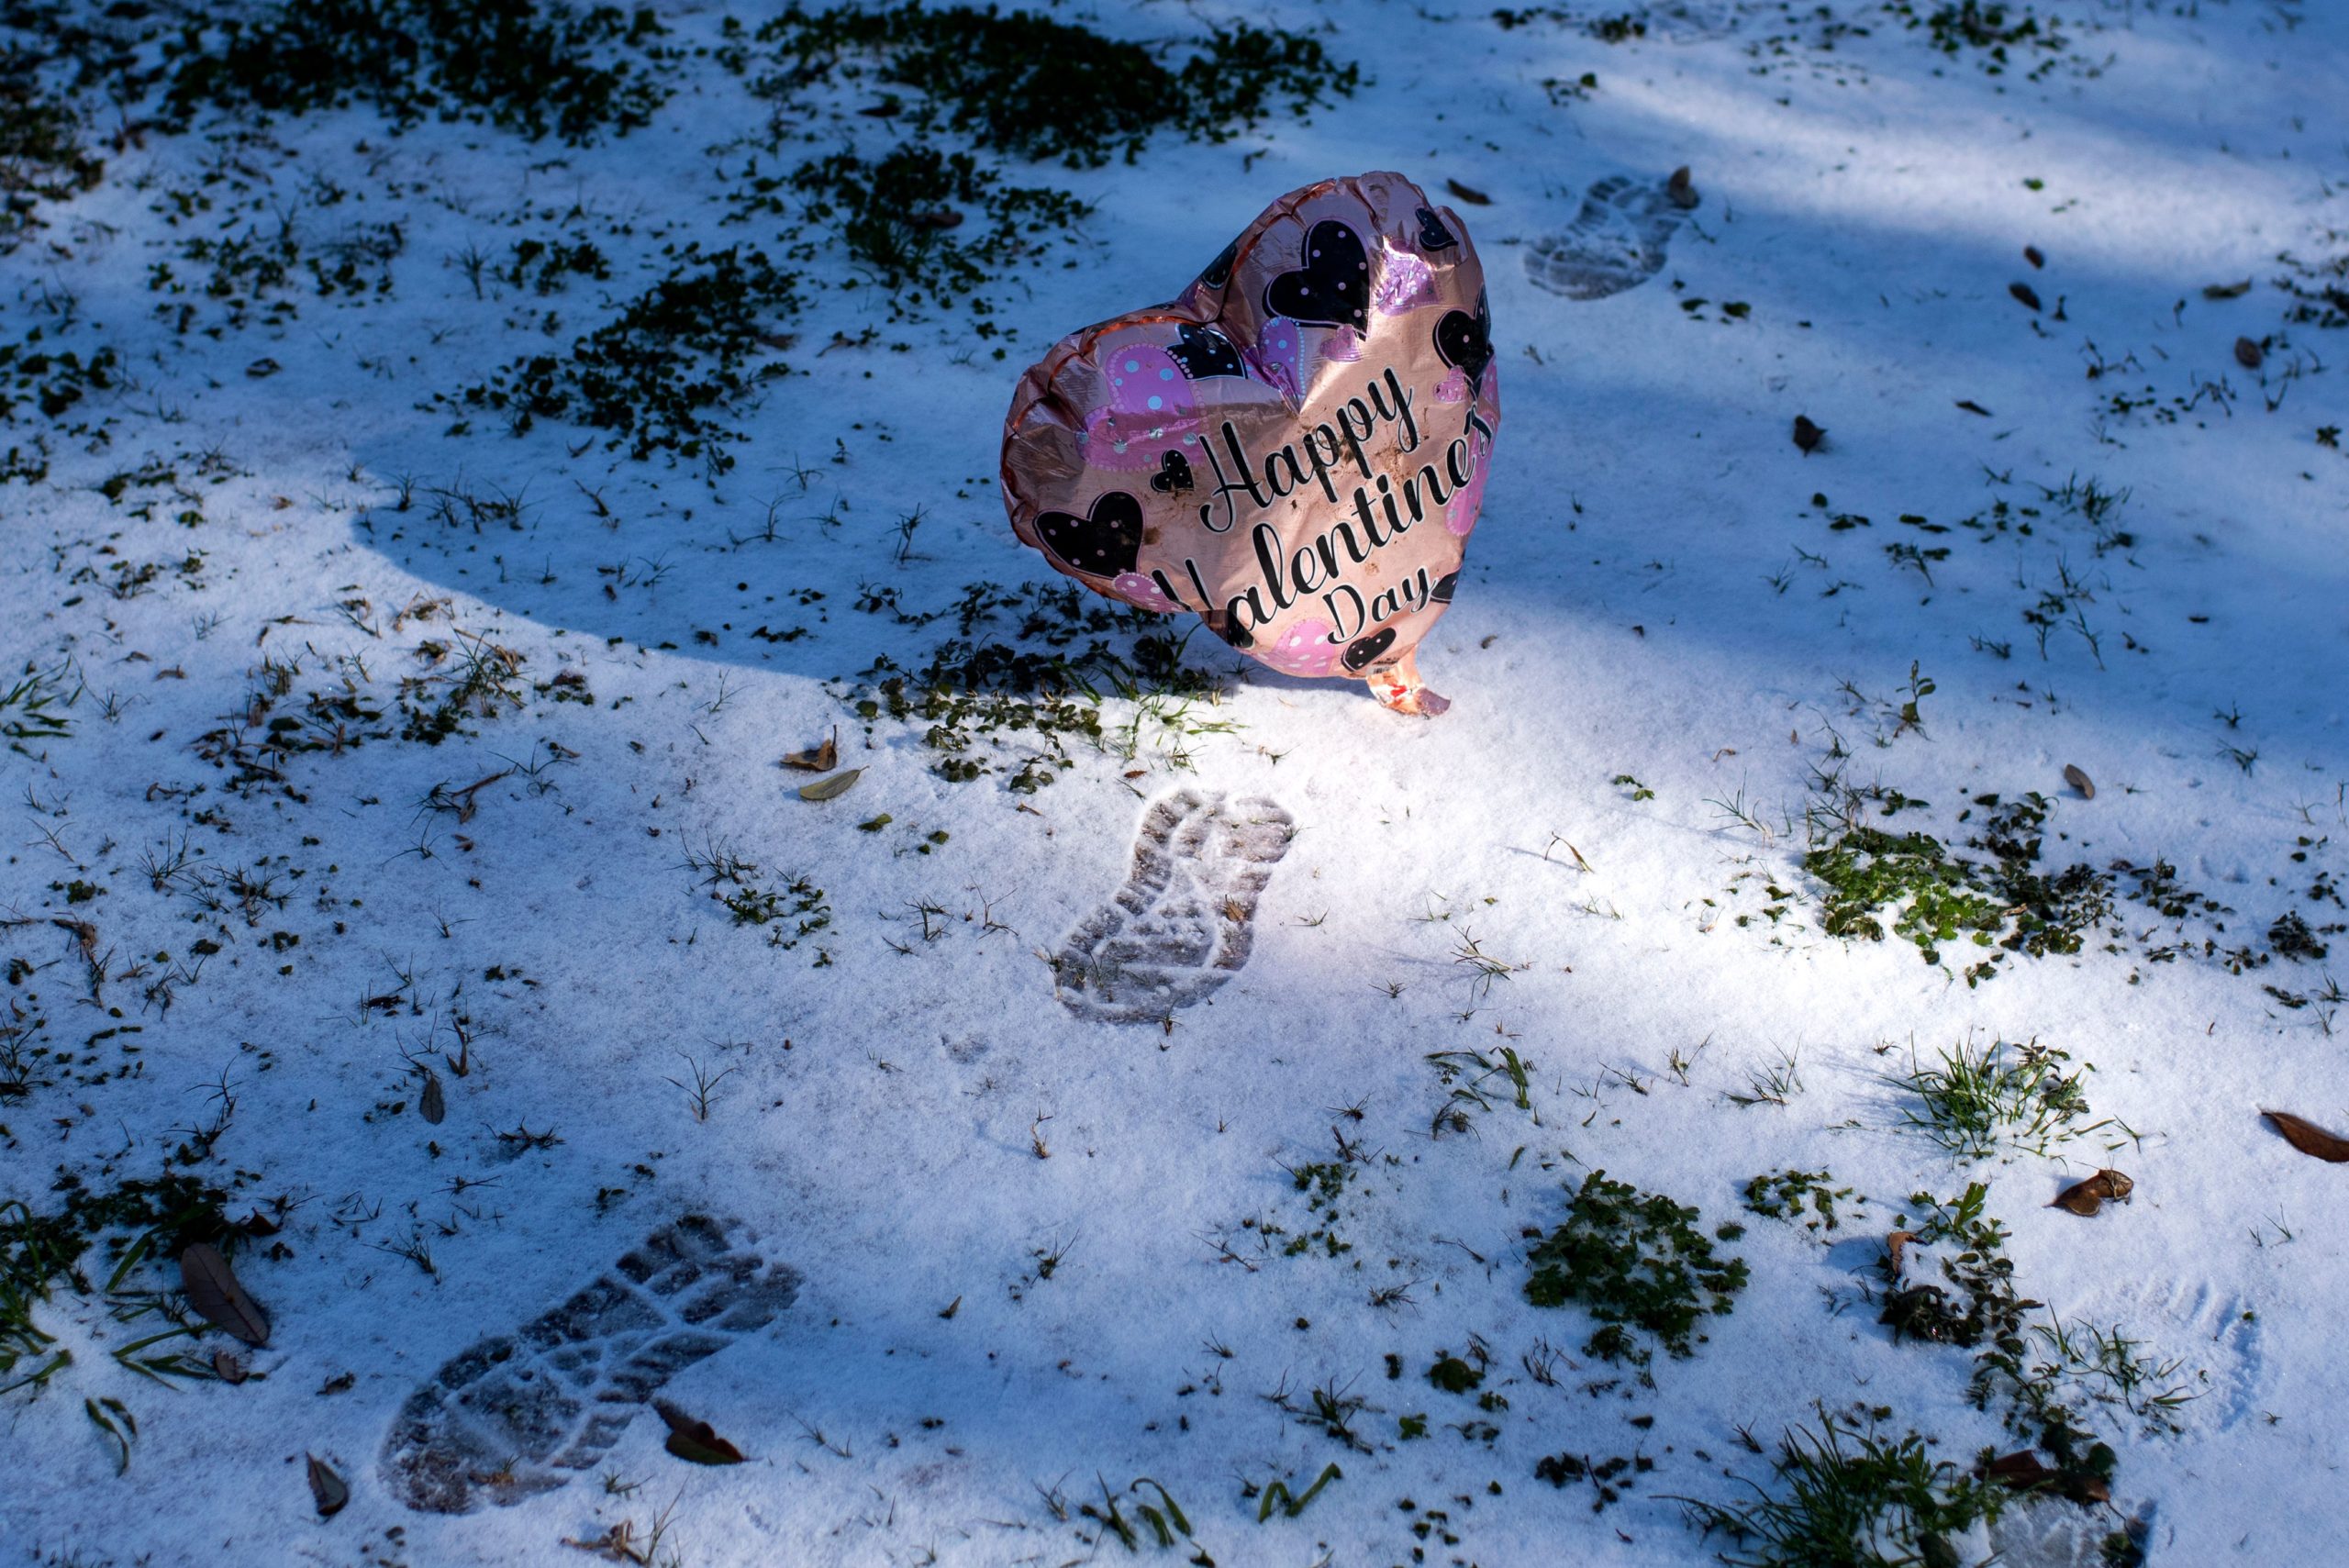 A photo of a heart-shaped Valentine's Day balloon in the snow